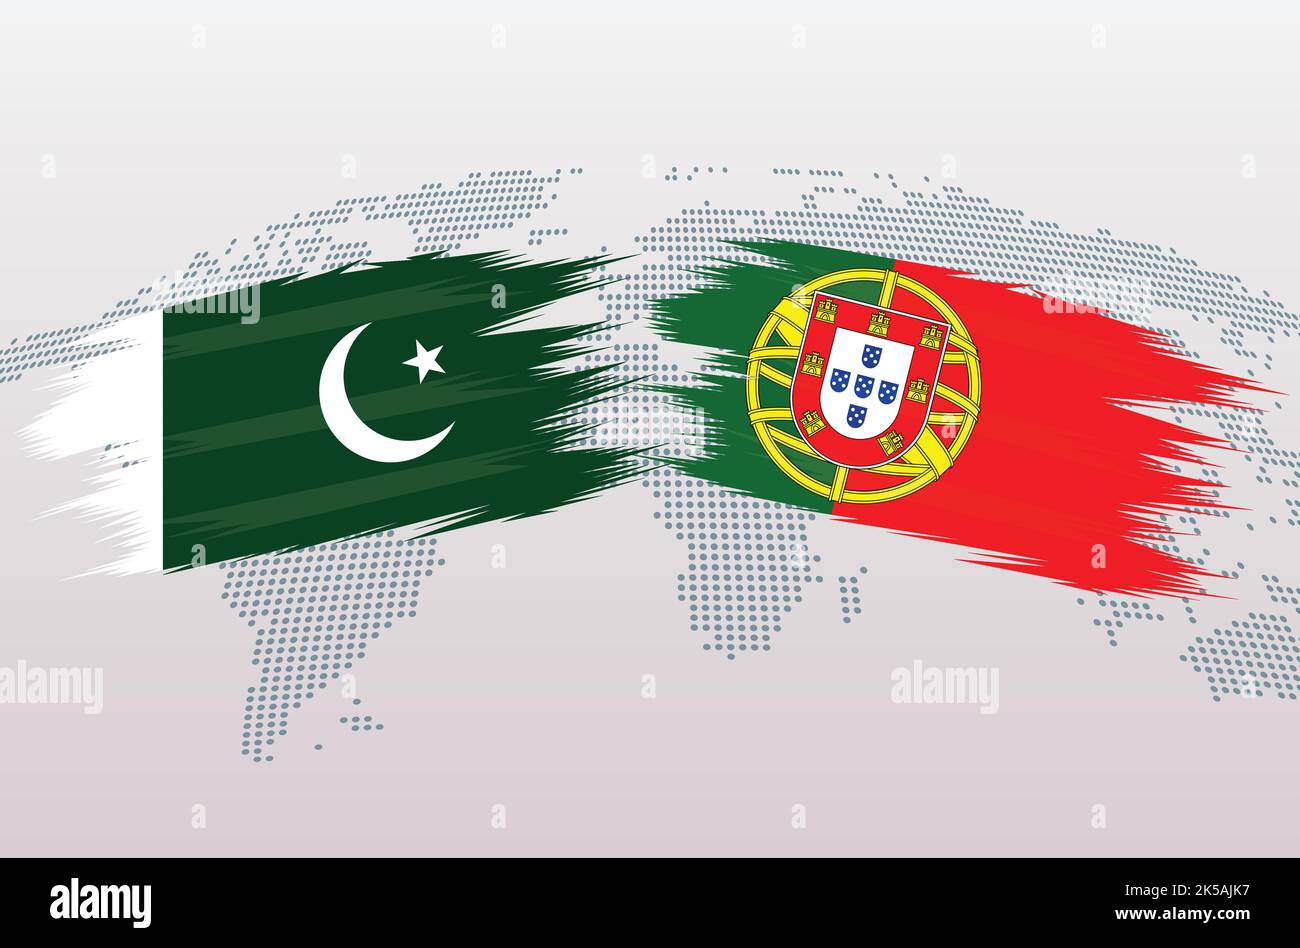 Map of portugal Royalty Free Vector Image - VectorStock